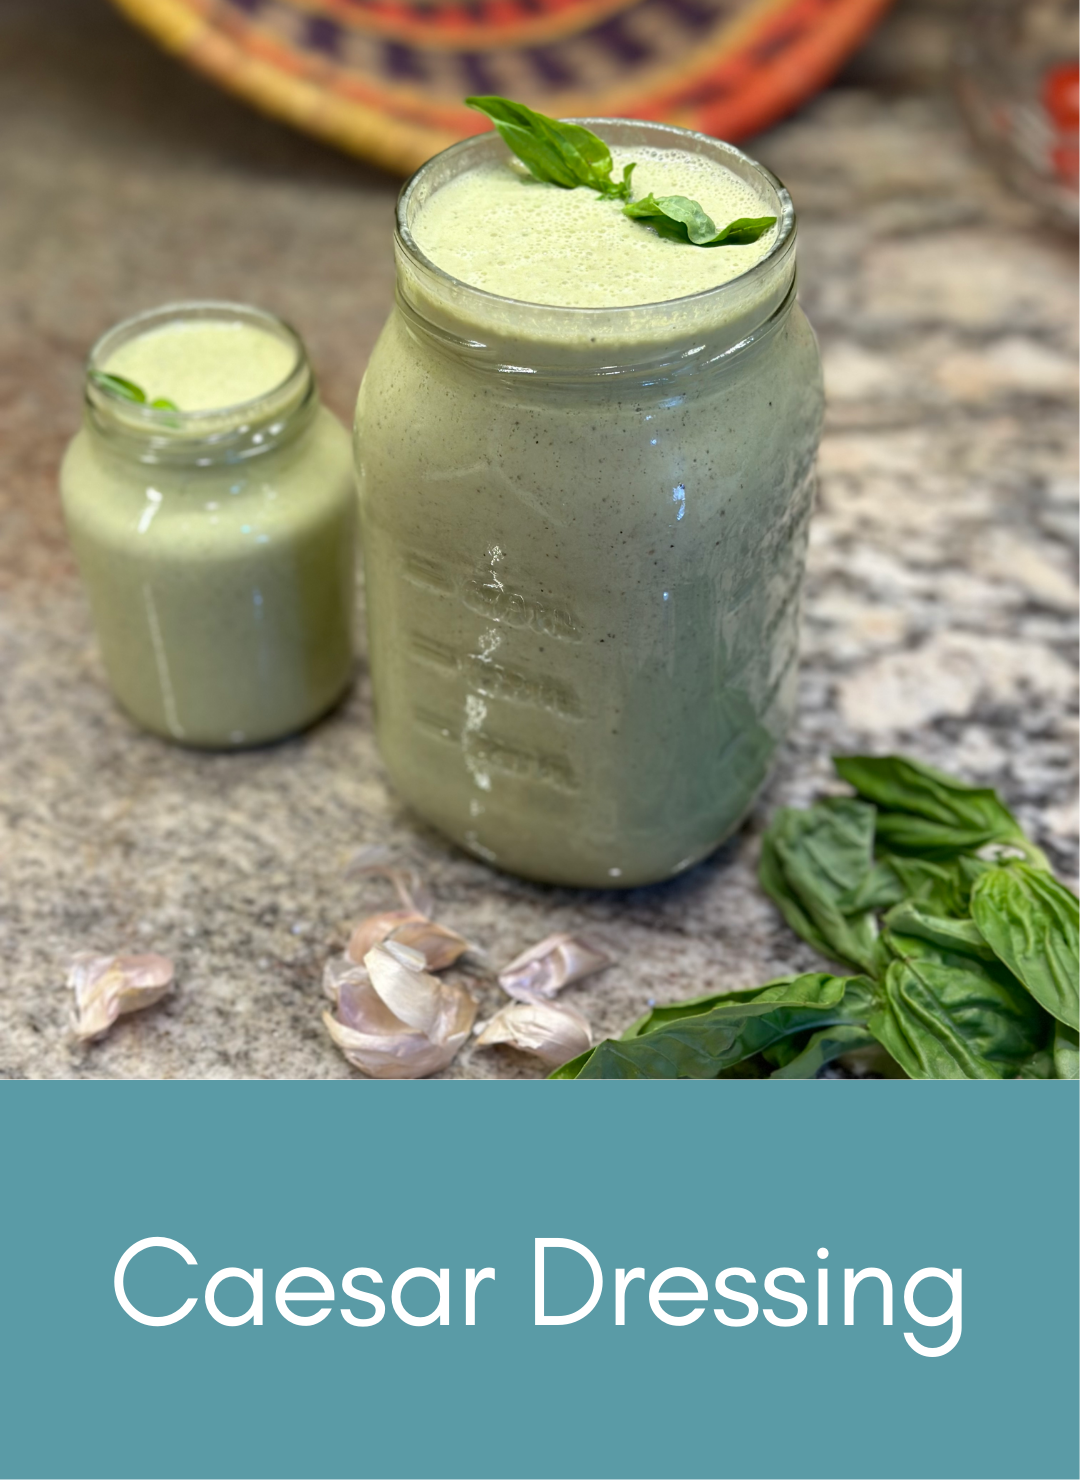 Whole food plant based caesar dressing Picture with link to recipe